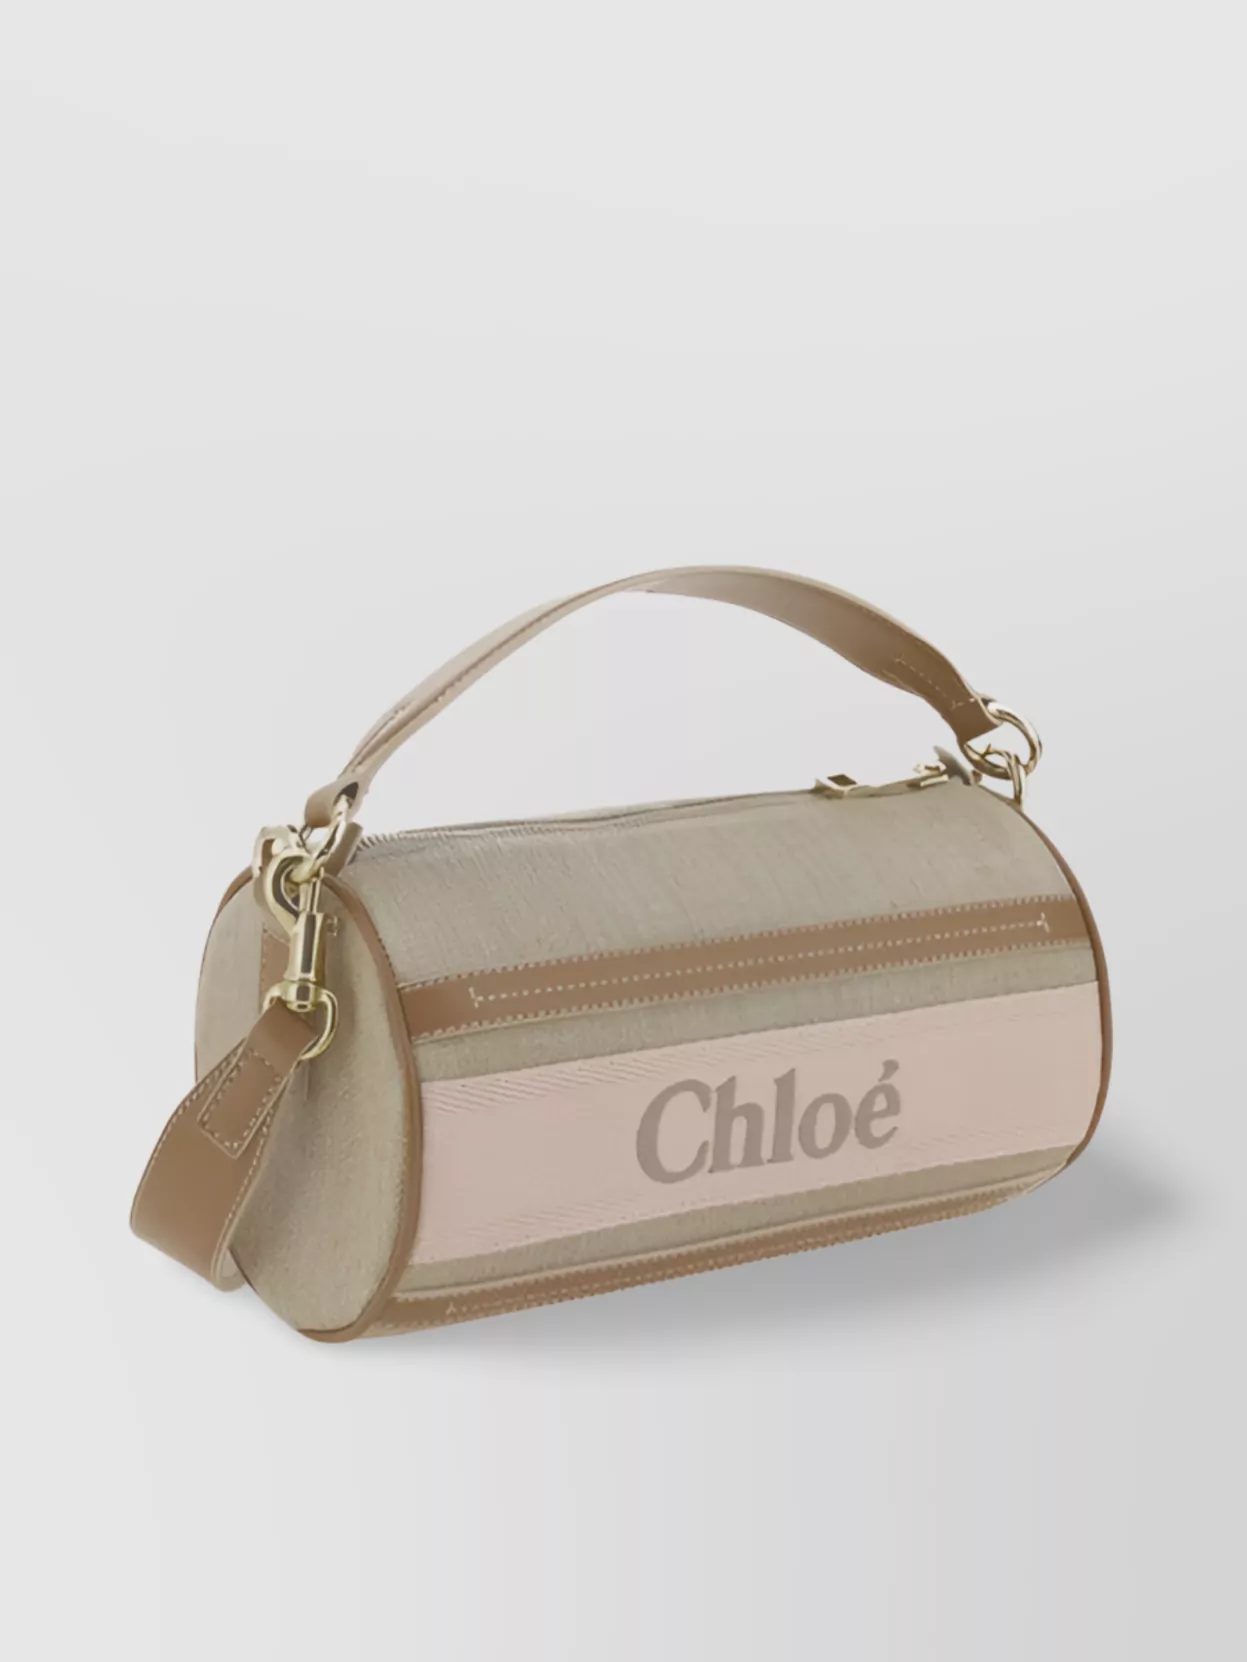 Chloé Round Leather Shoulder Bag With Gold Hardware In Neutral